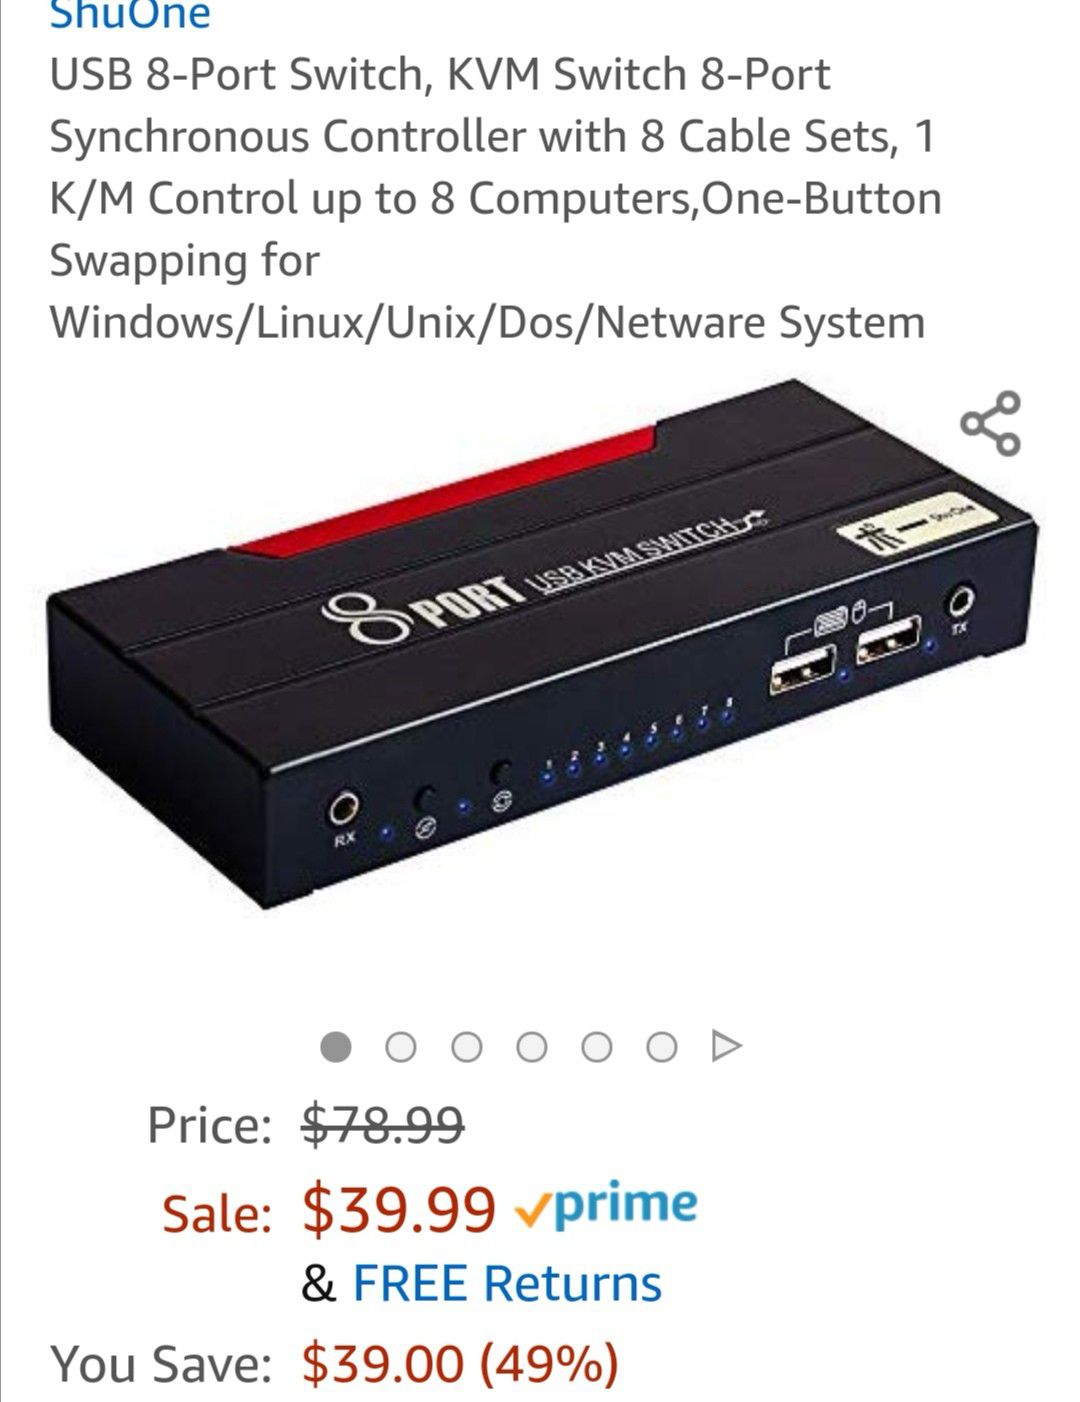 USB 8-Port Switch, KVM Switch 8-Port Synchronous Controller with 8 Cable Sets